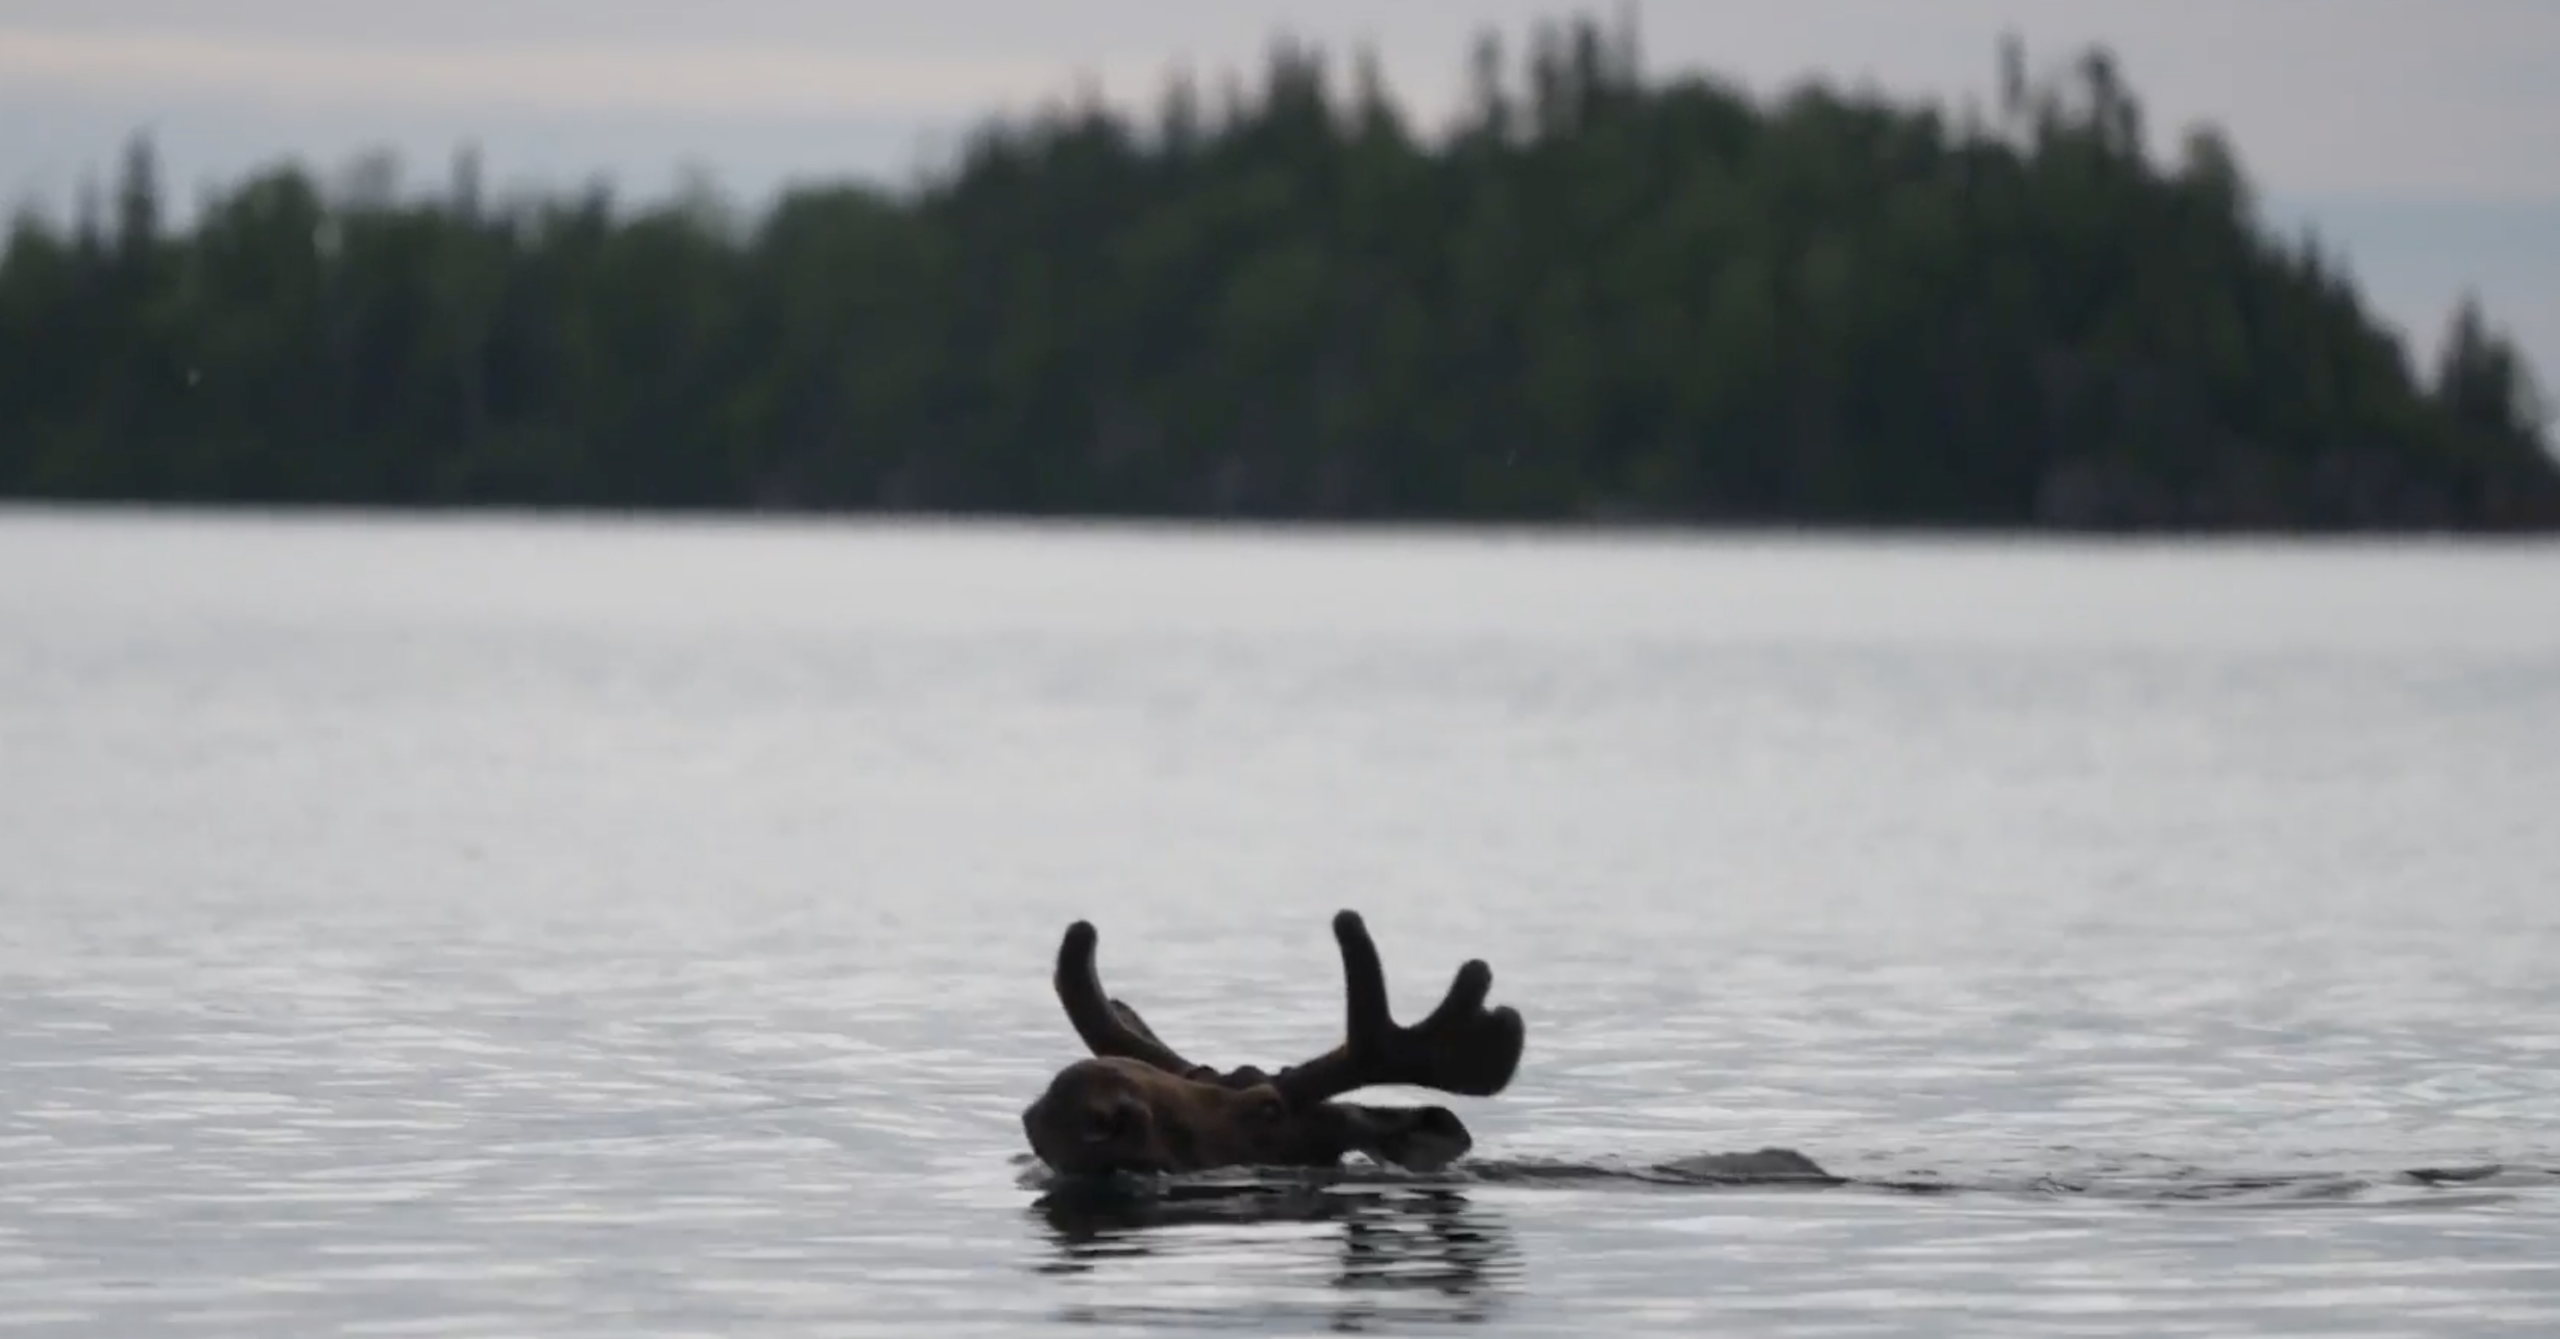 A moose head poking out of the water of a lake.